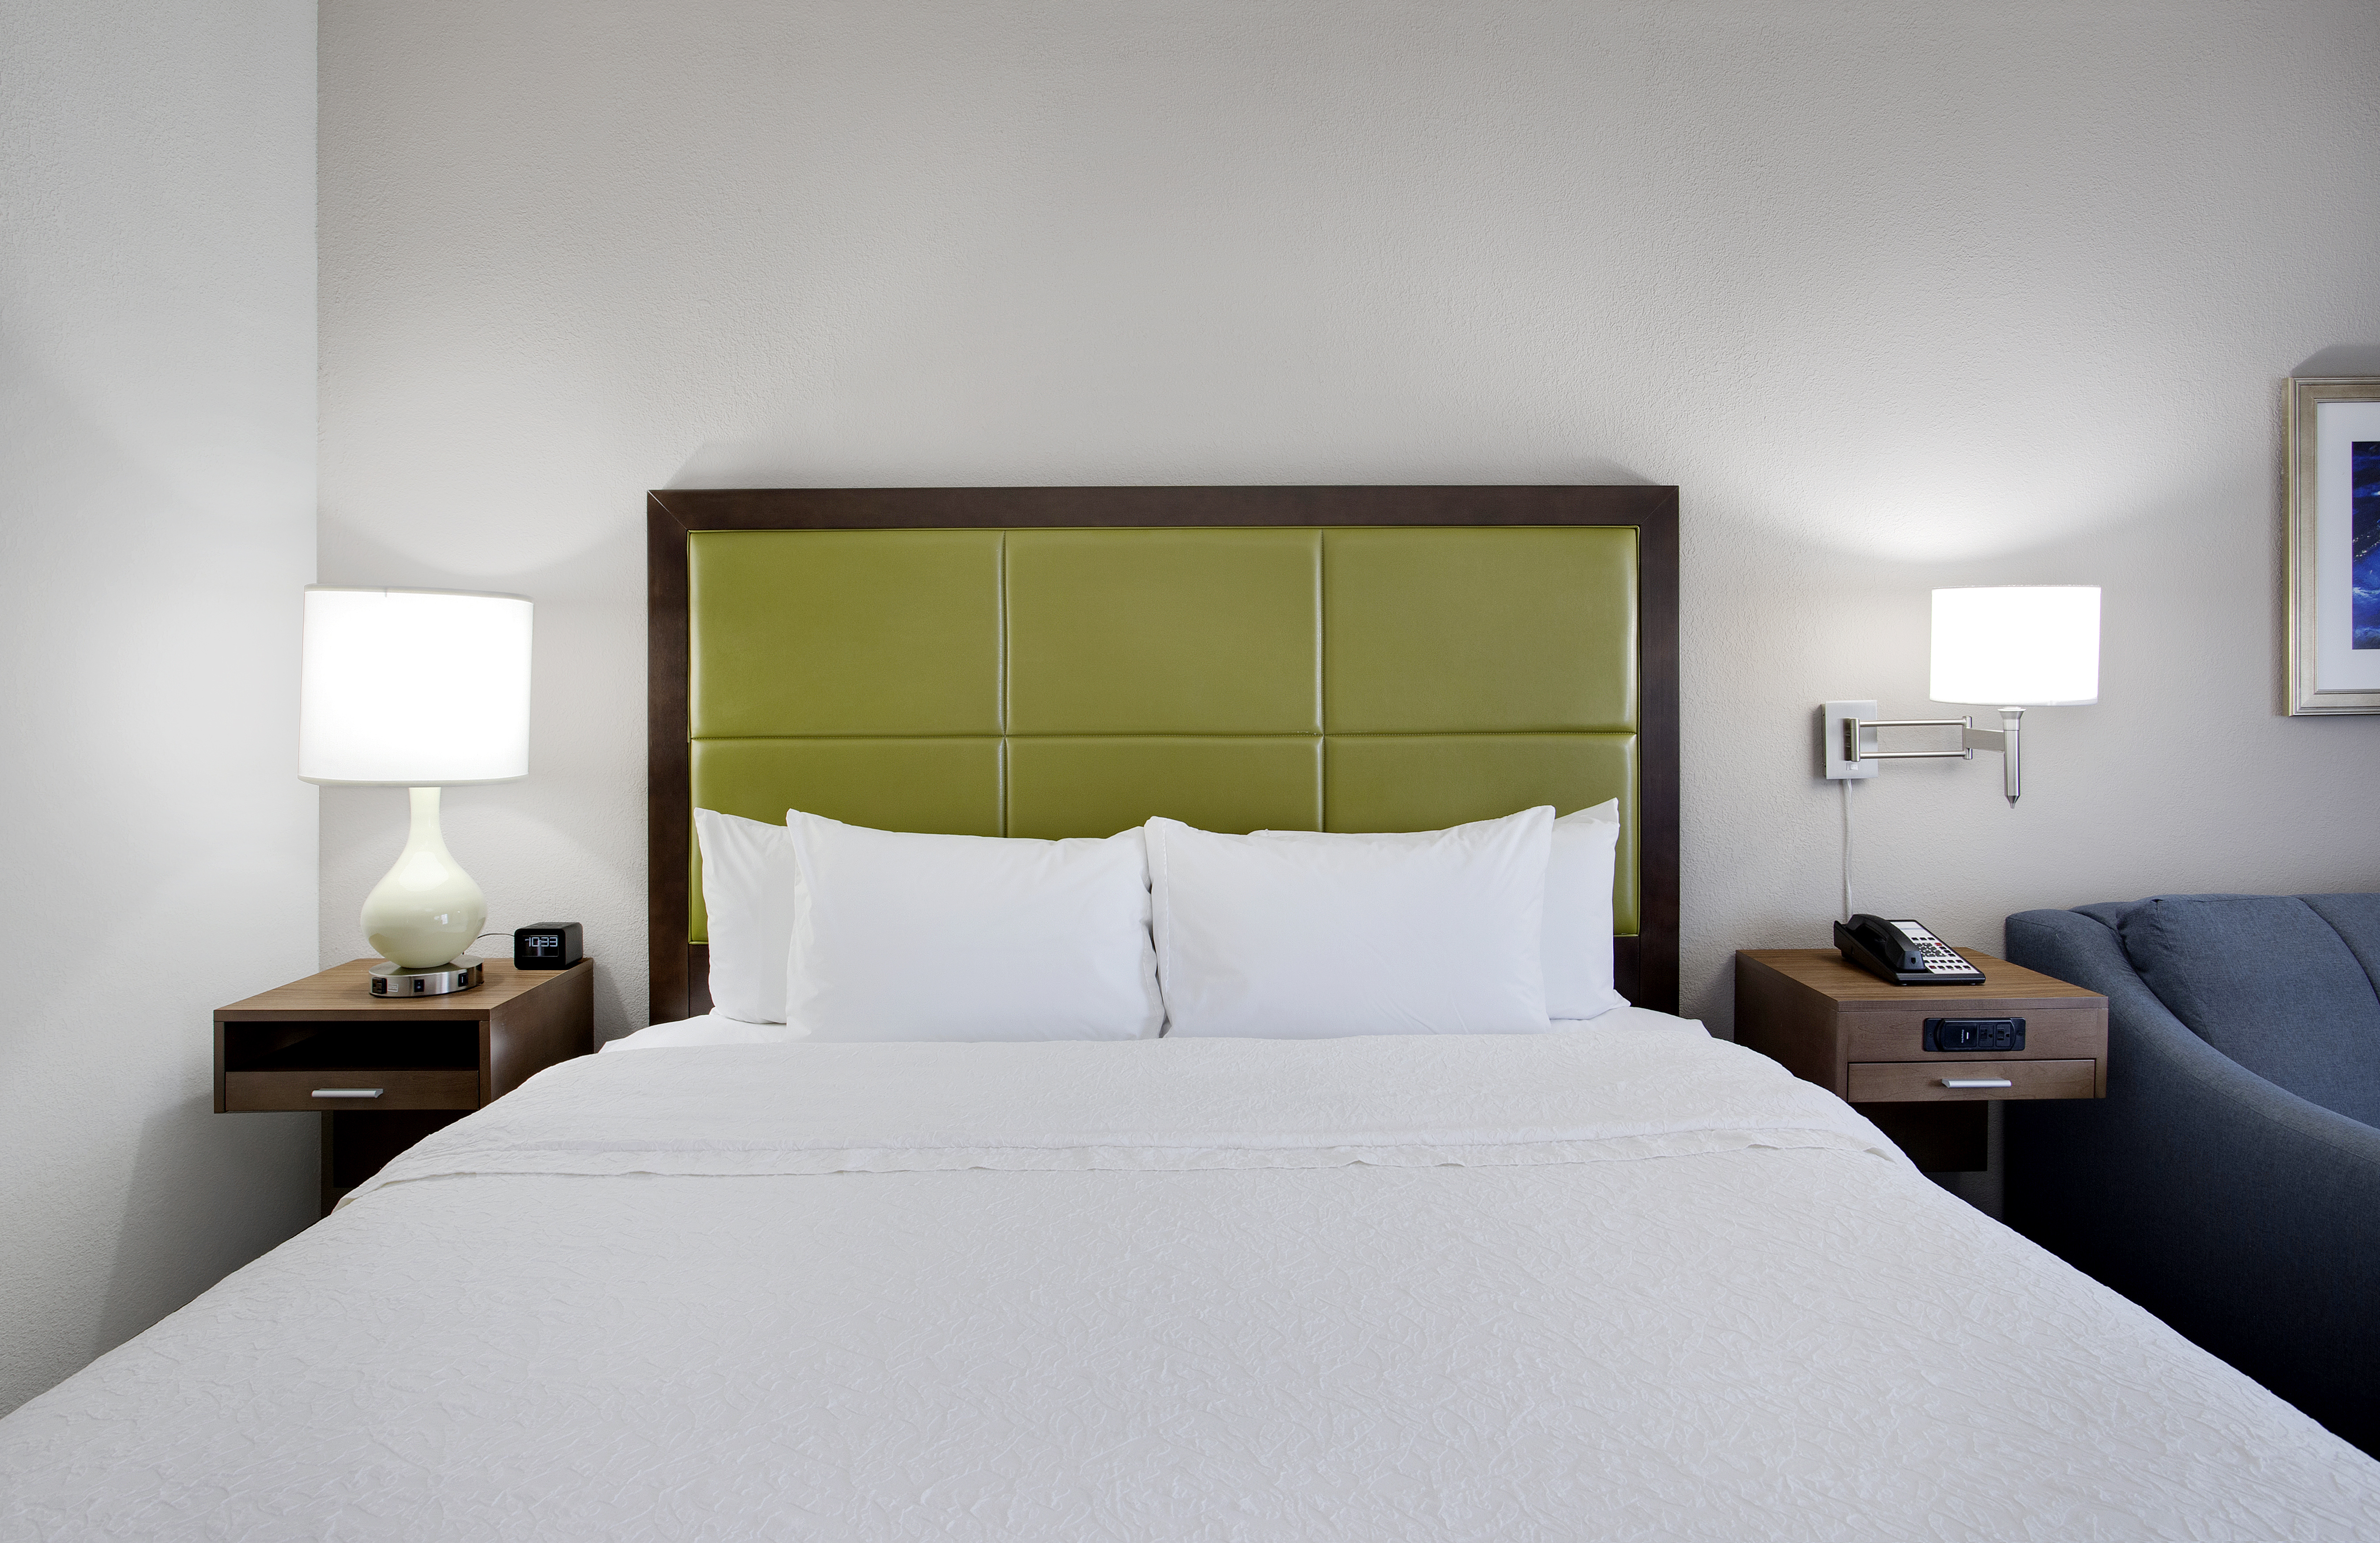 Hampton Inn Middletown Hotel, NY - King Bed and Nightstands with Lighting